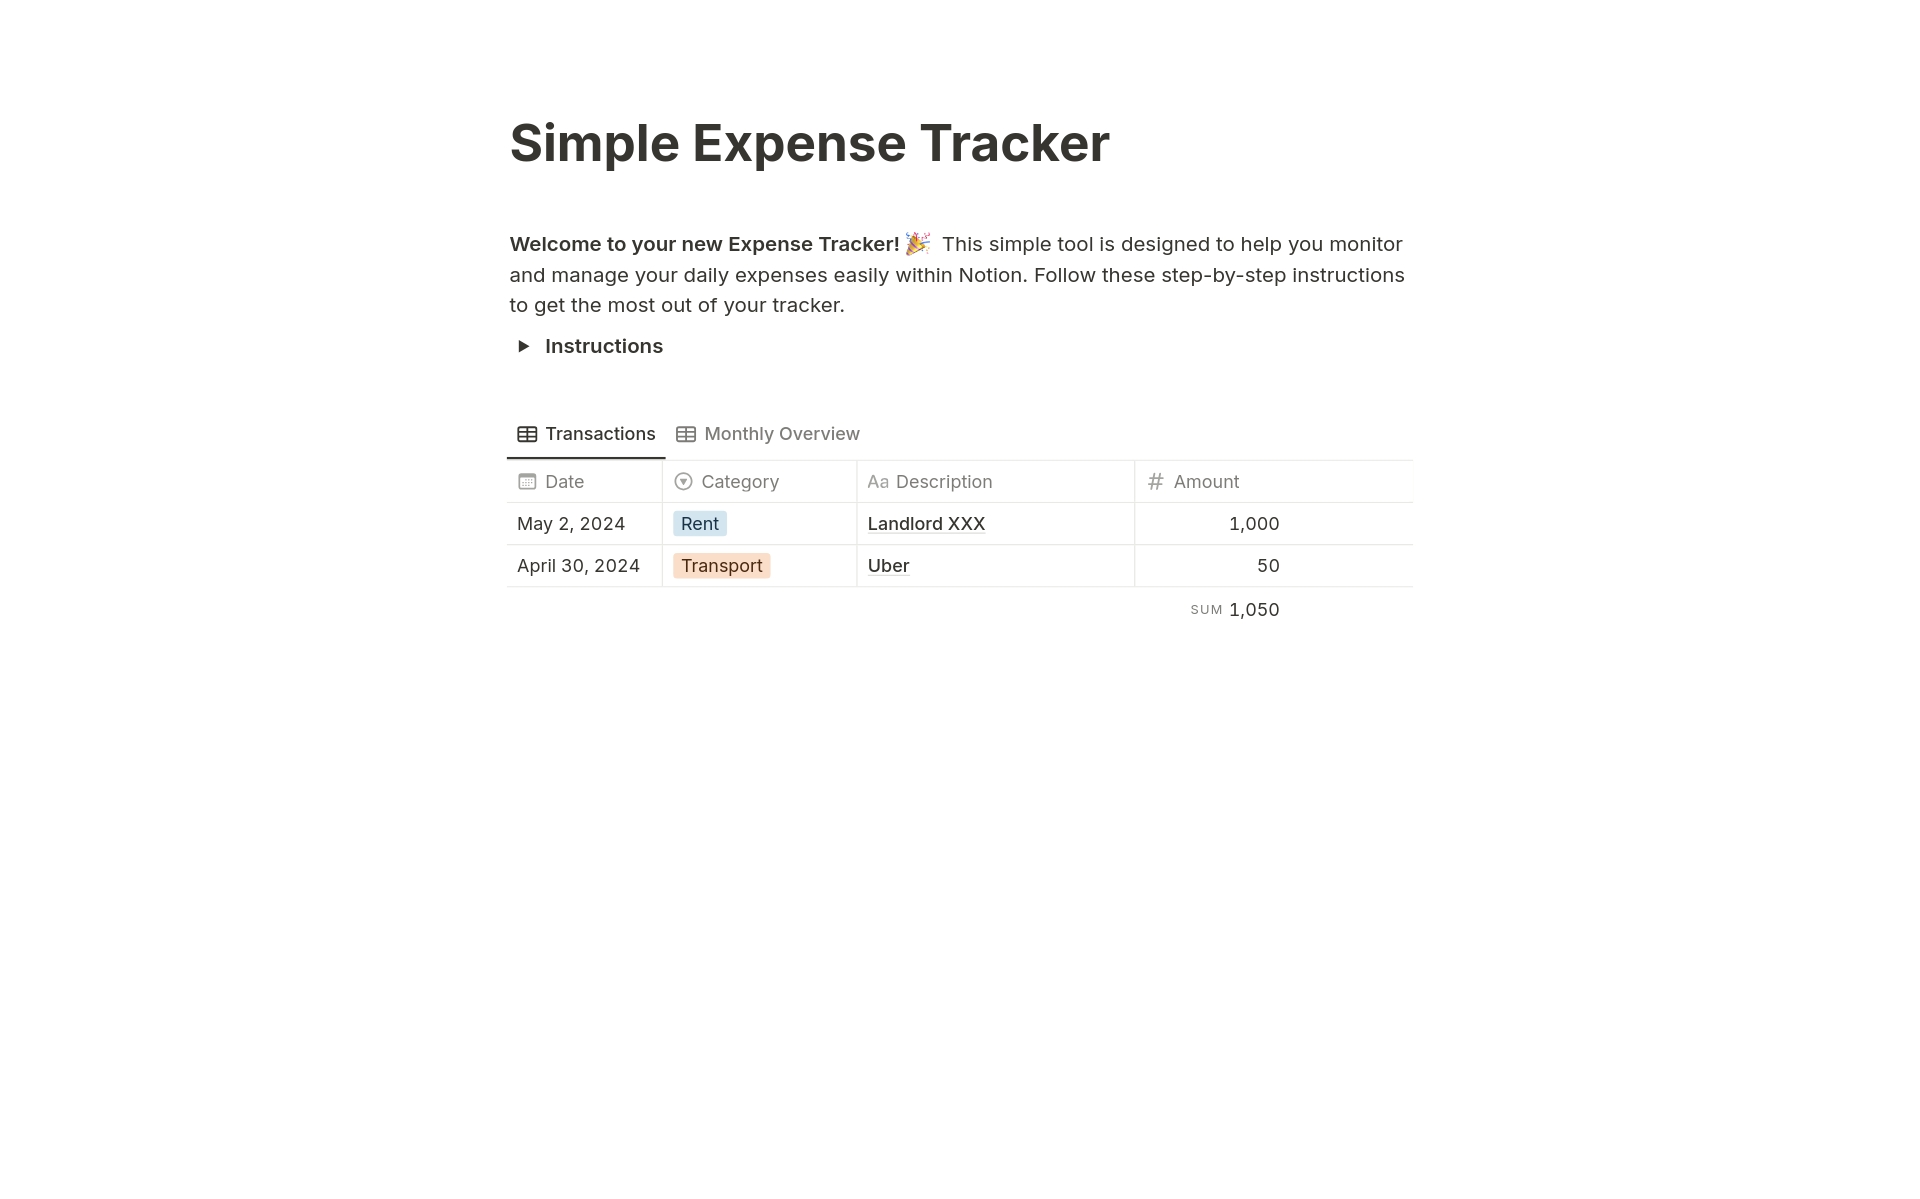 This simple tool is designed to help you monitor and manage your daily expenses easily within Notion. Follow these step-by-step instructions to get the most out of your tracker.